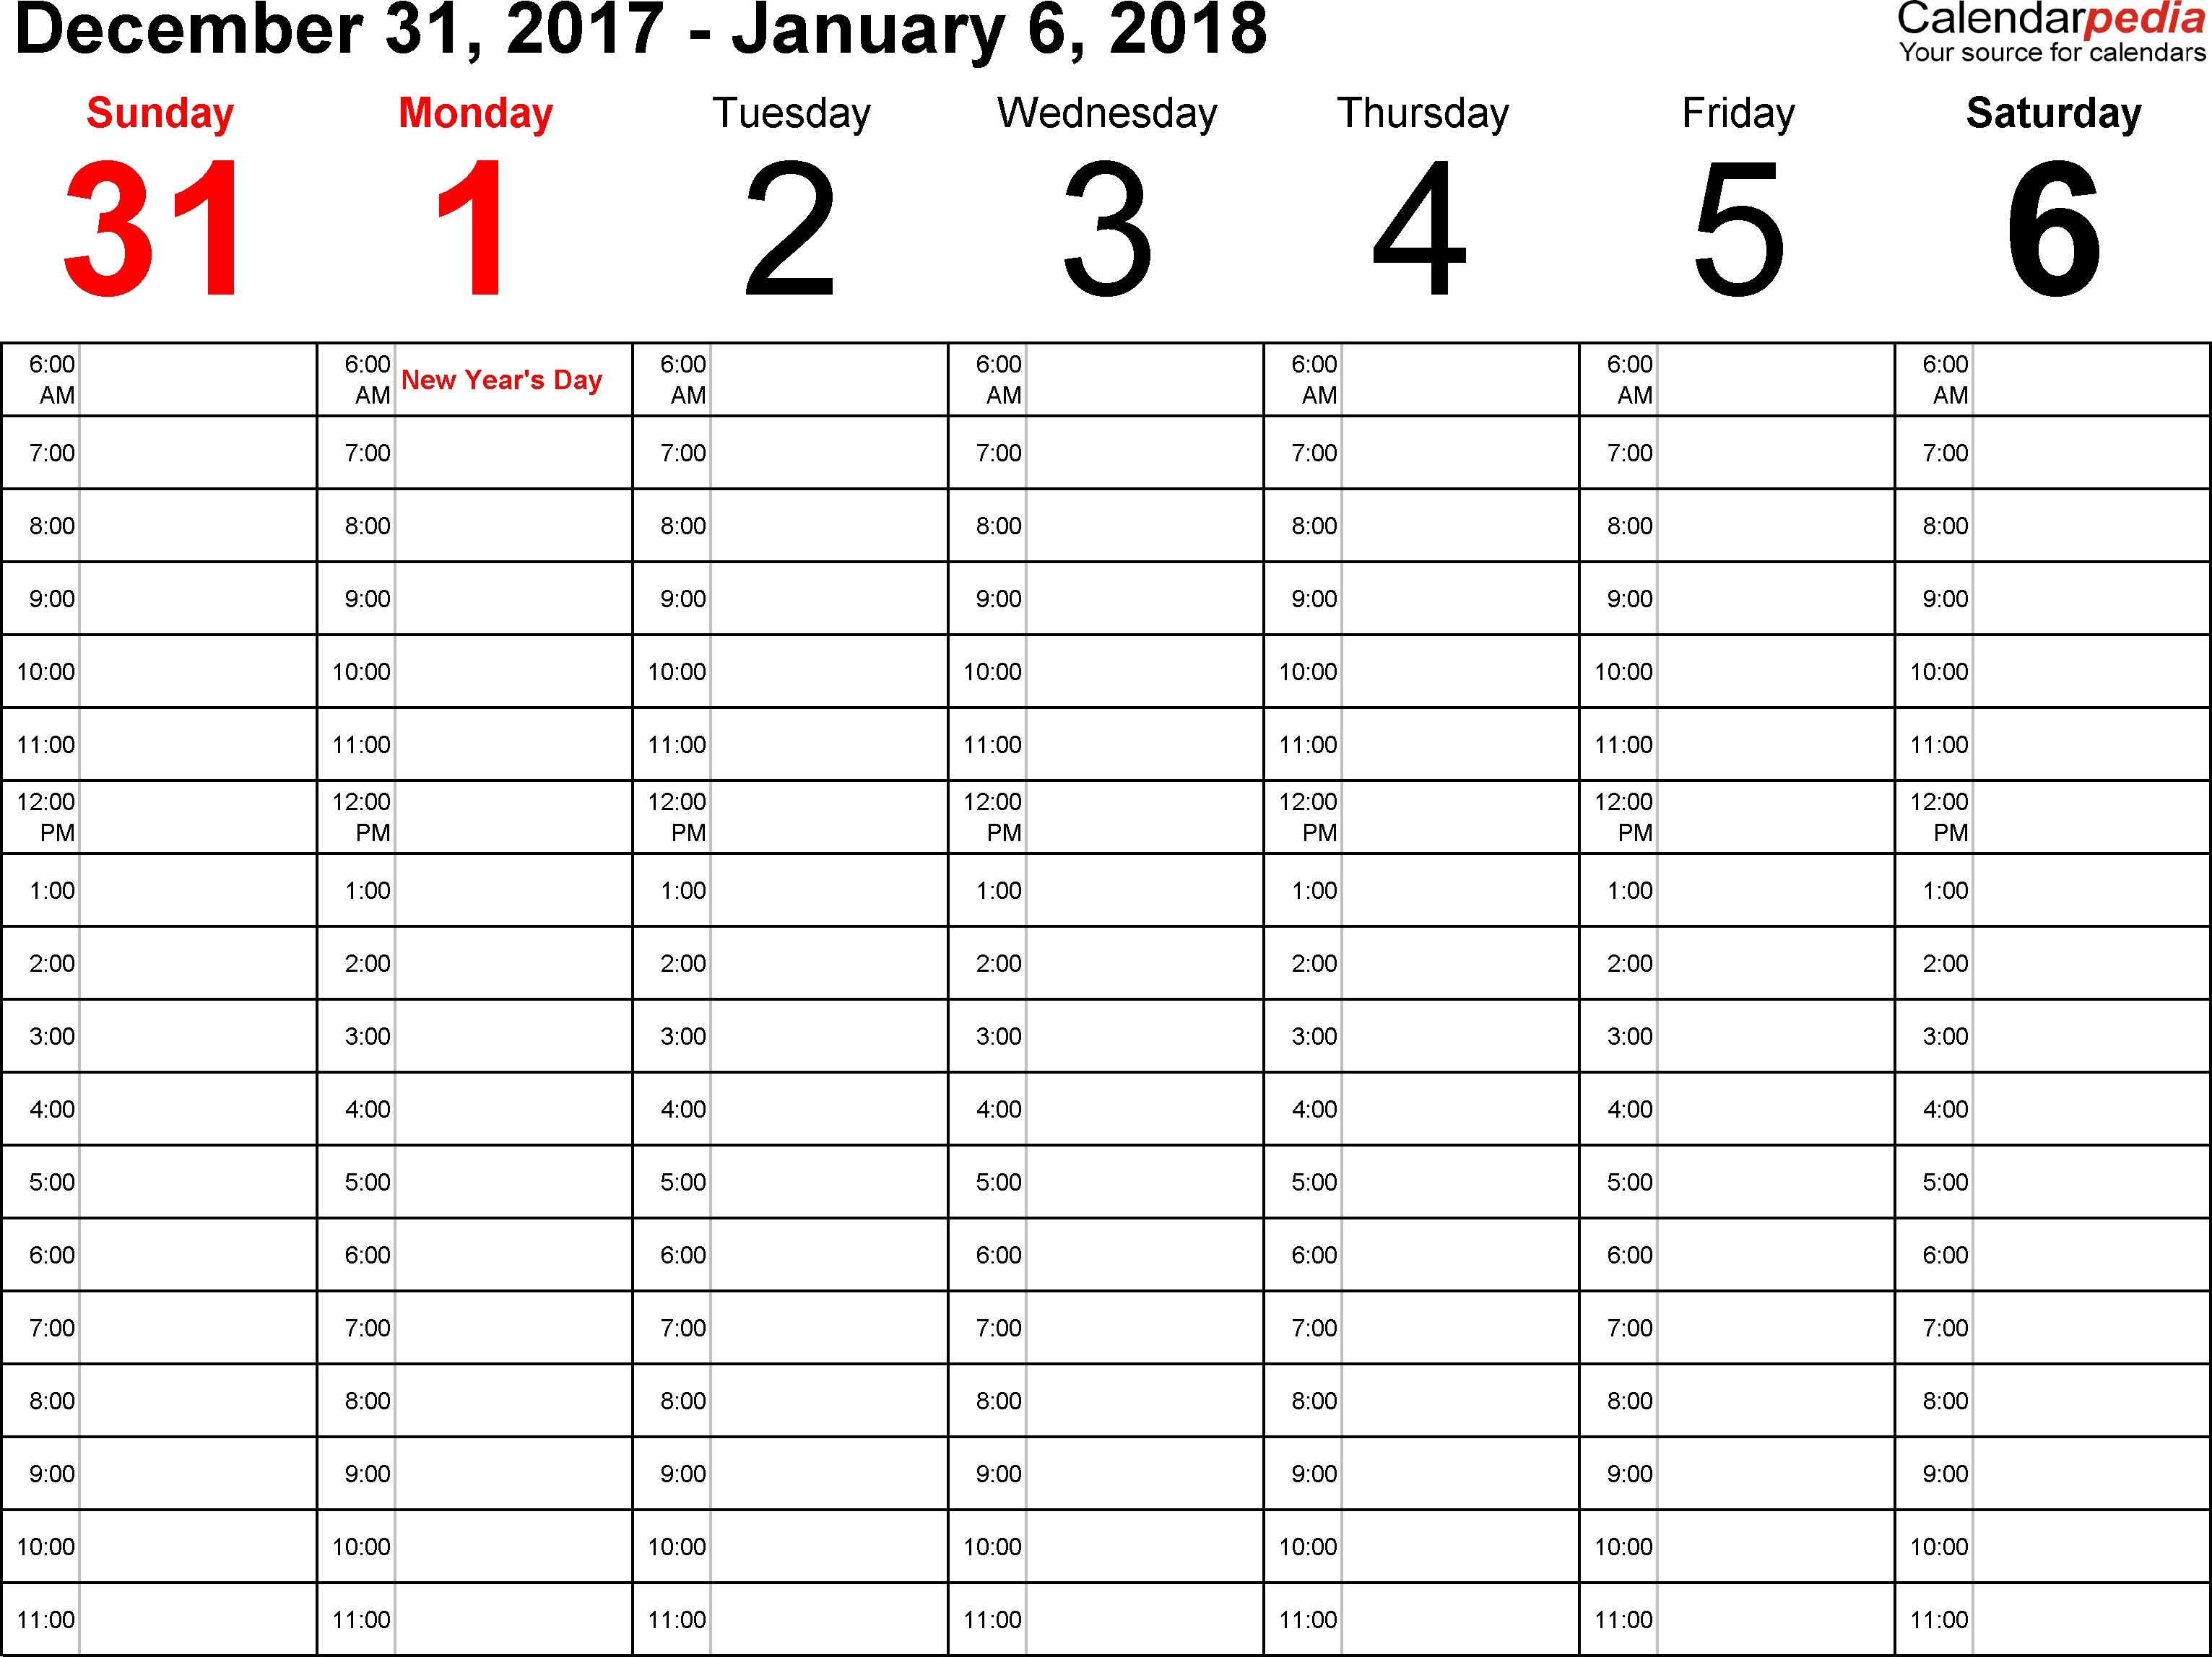 Weekly Calendar 2018 For Word - 12 Free Printable Templates for Blank 7-Day Calendar With Time